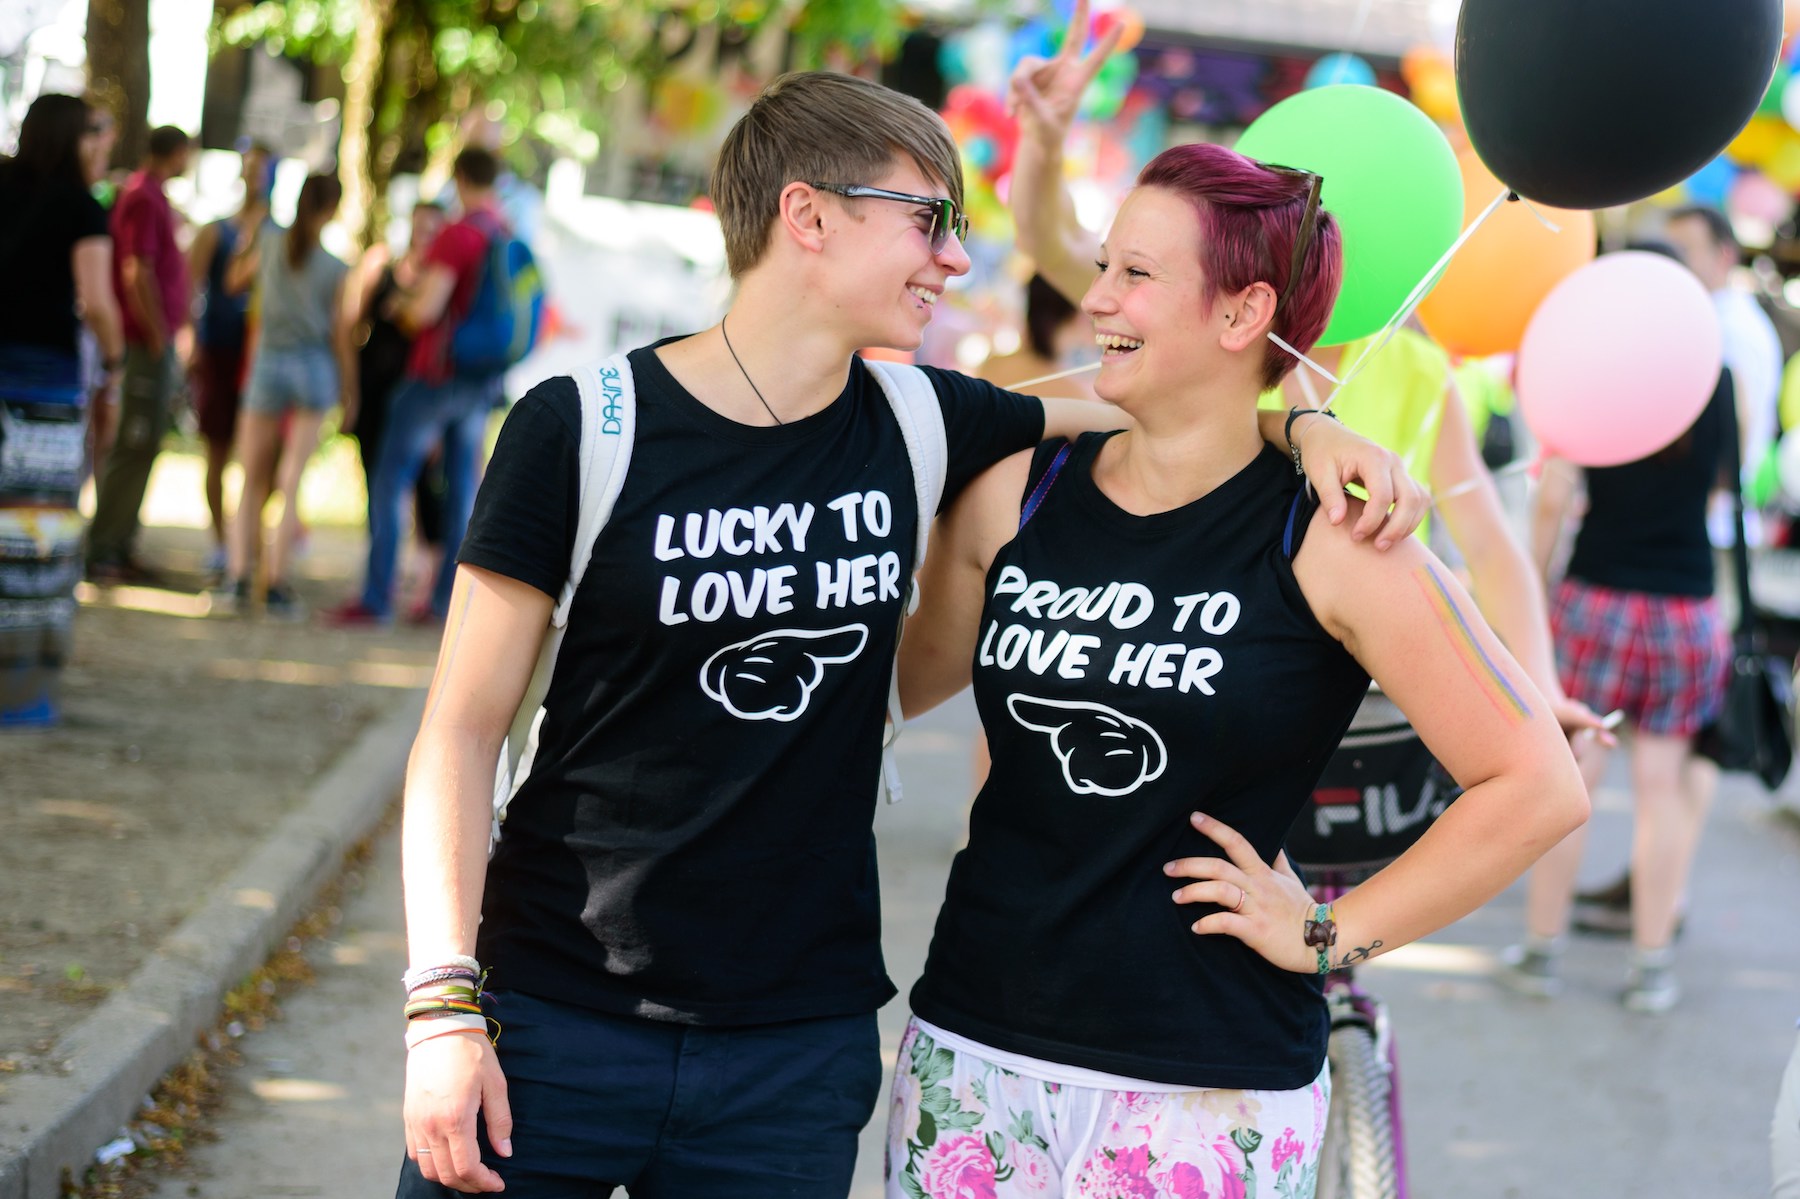 Slovenia Has Legalized Same-Sex Marriage And Adoption, First Central European Country To Do So